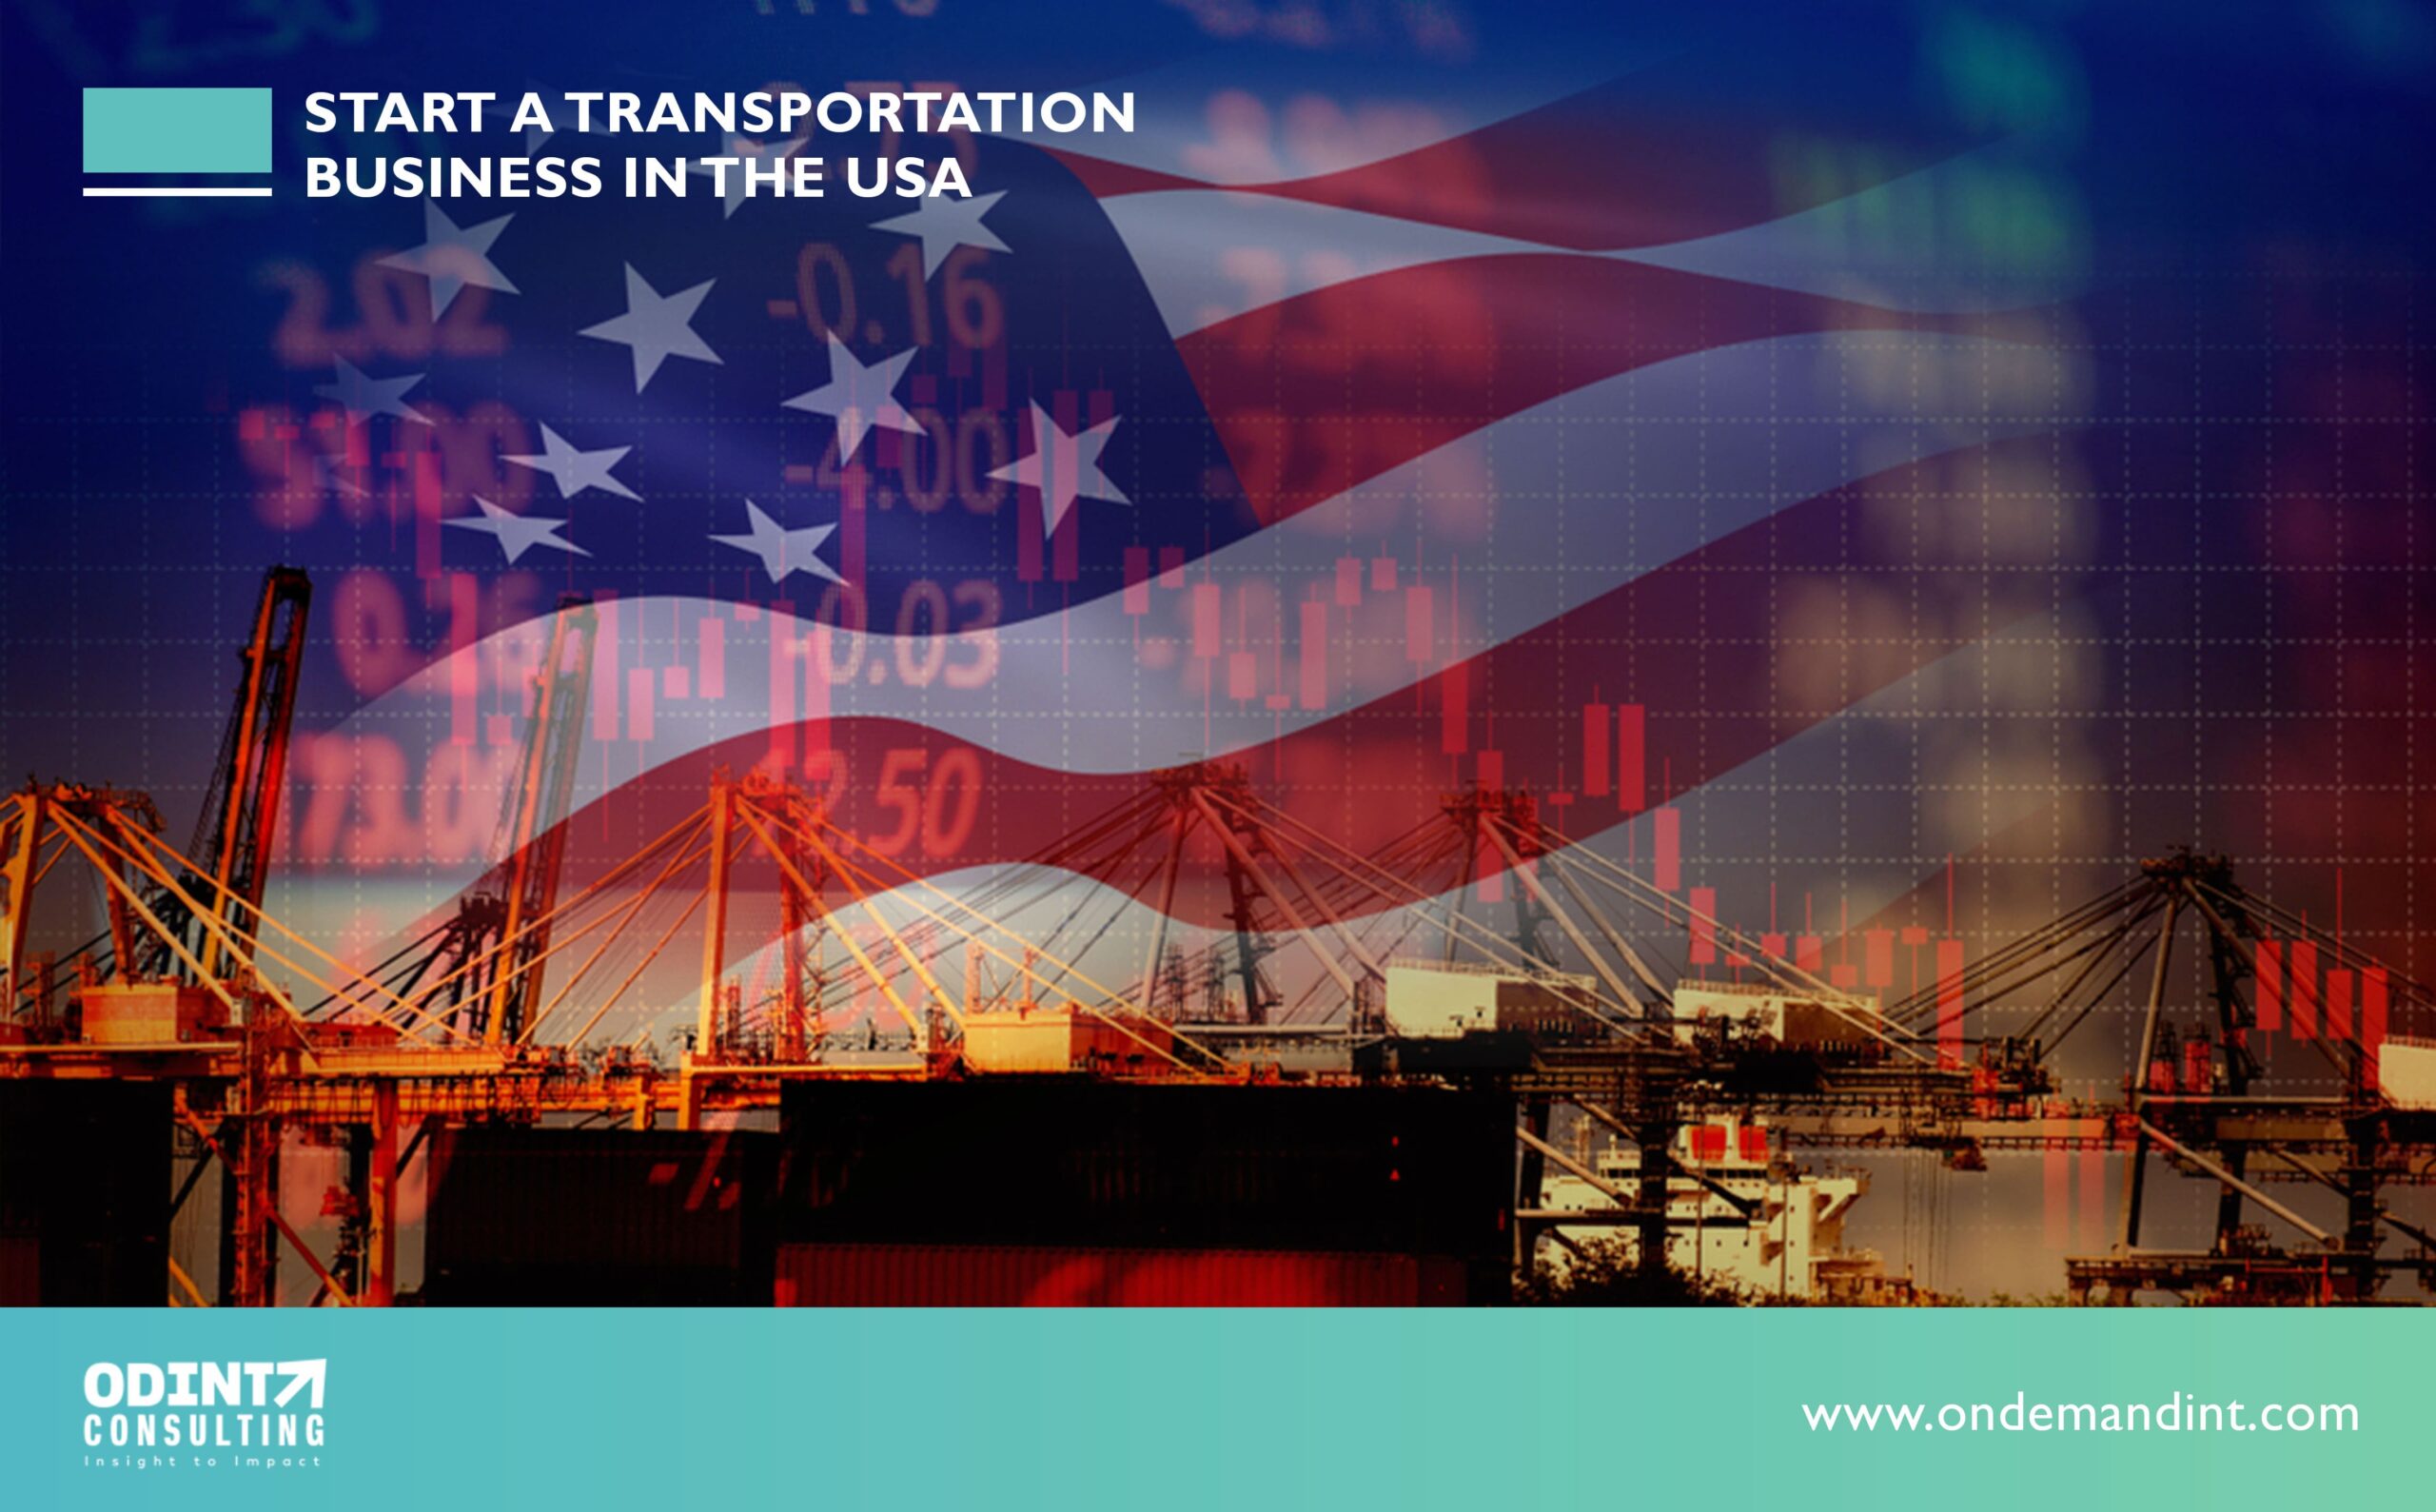 6 Requirements to Start a Transportation Business in the USA: Brief Overview